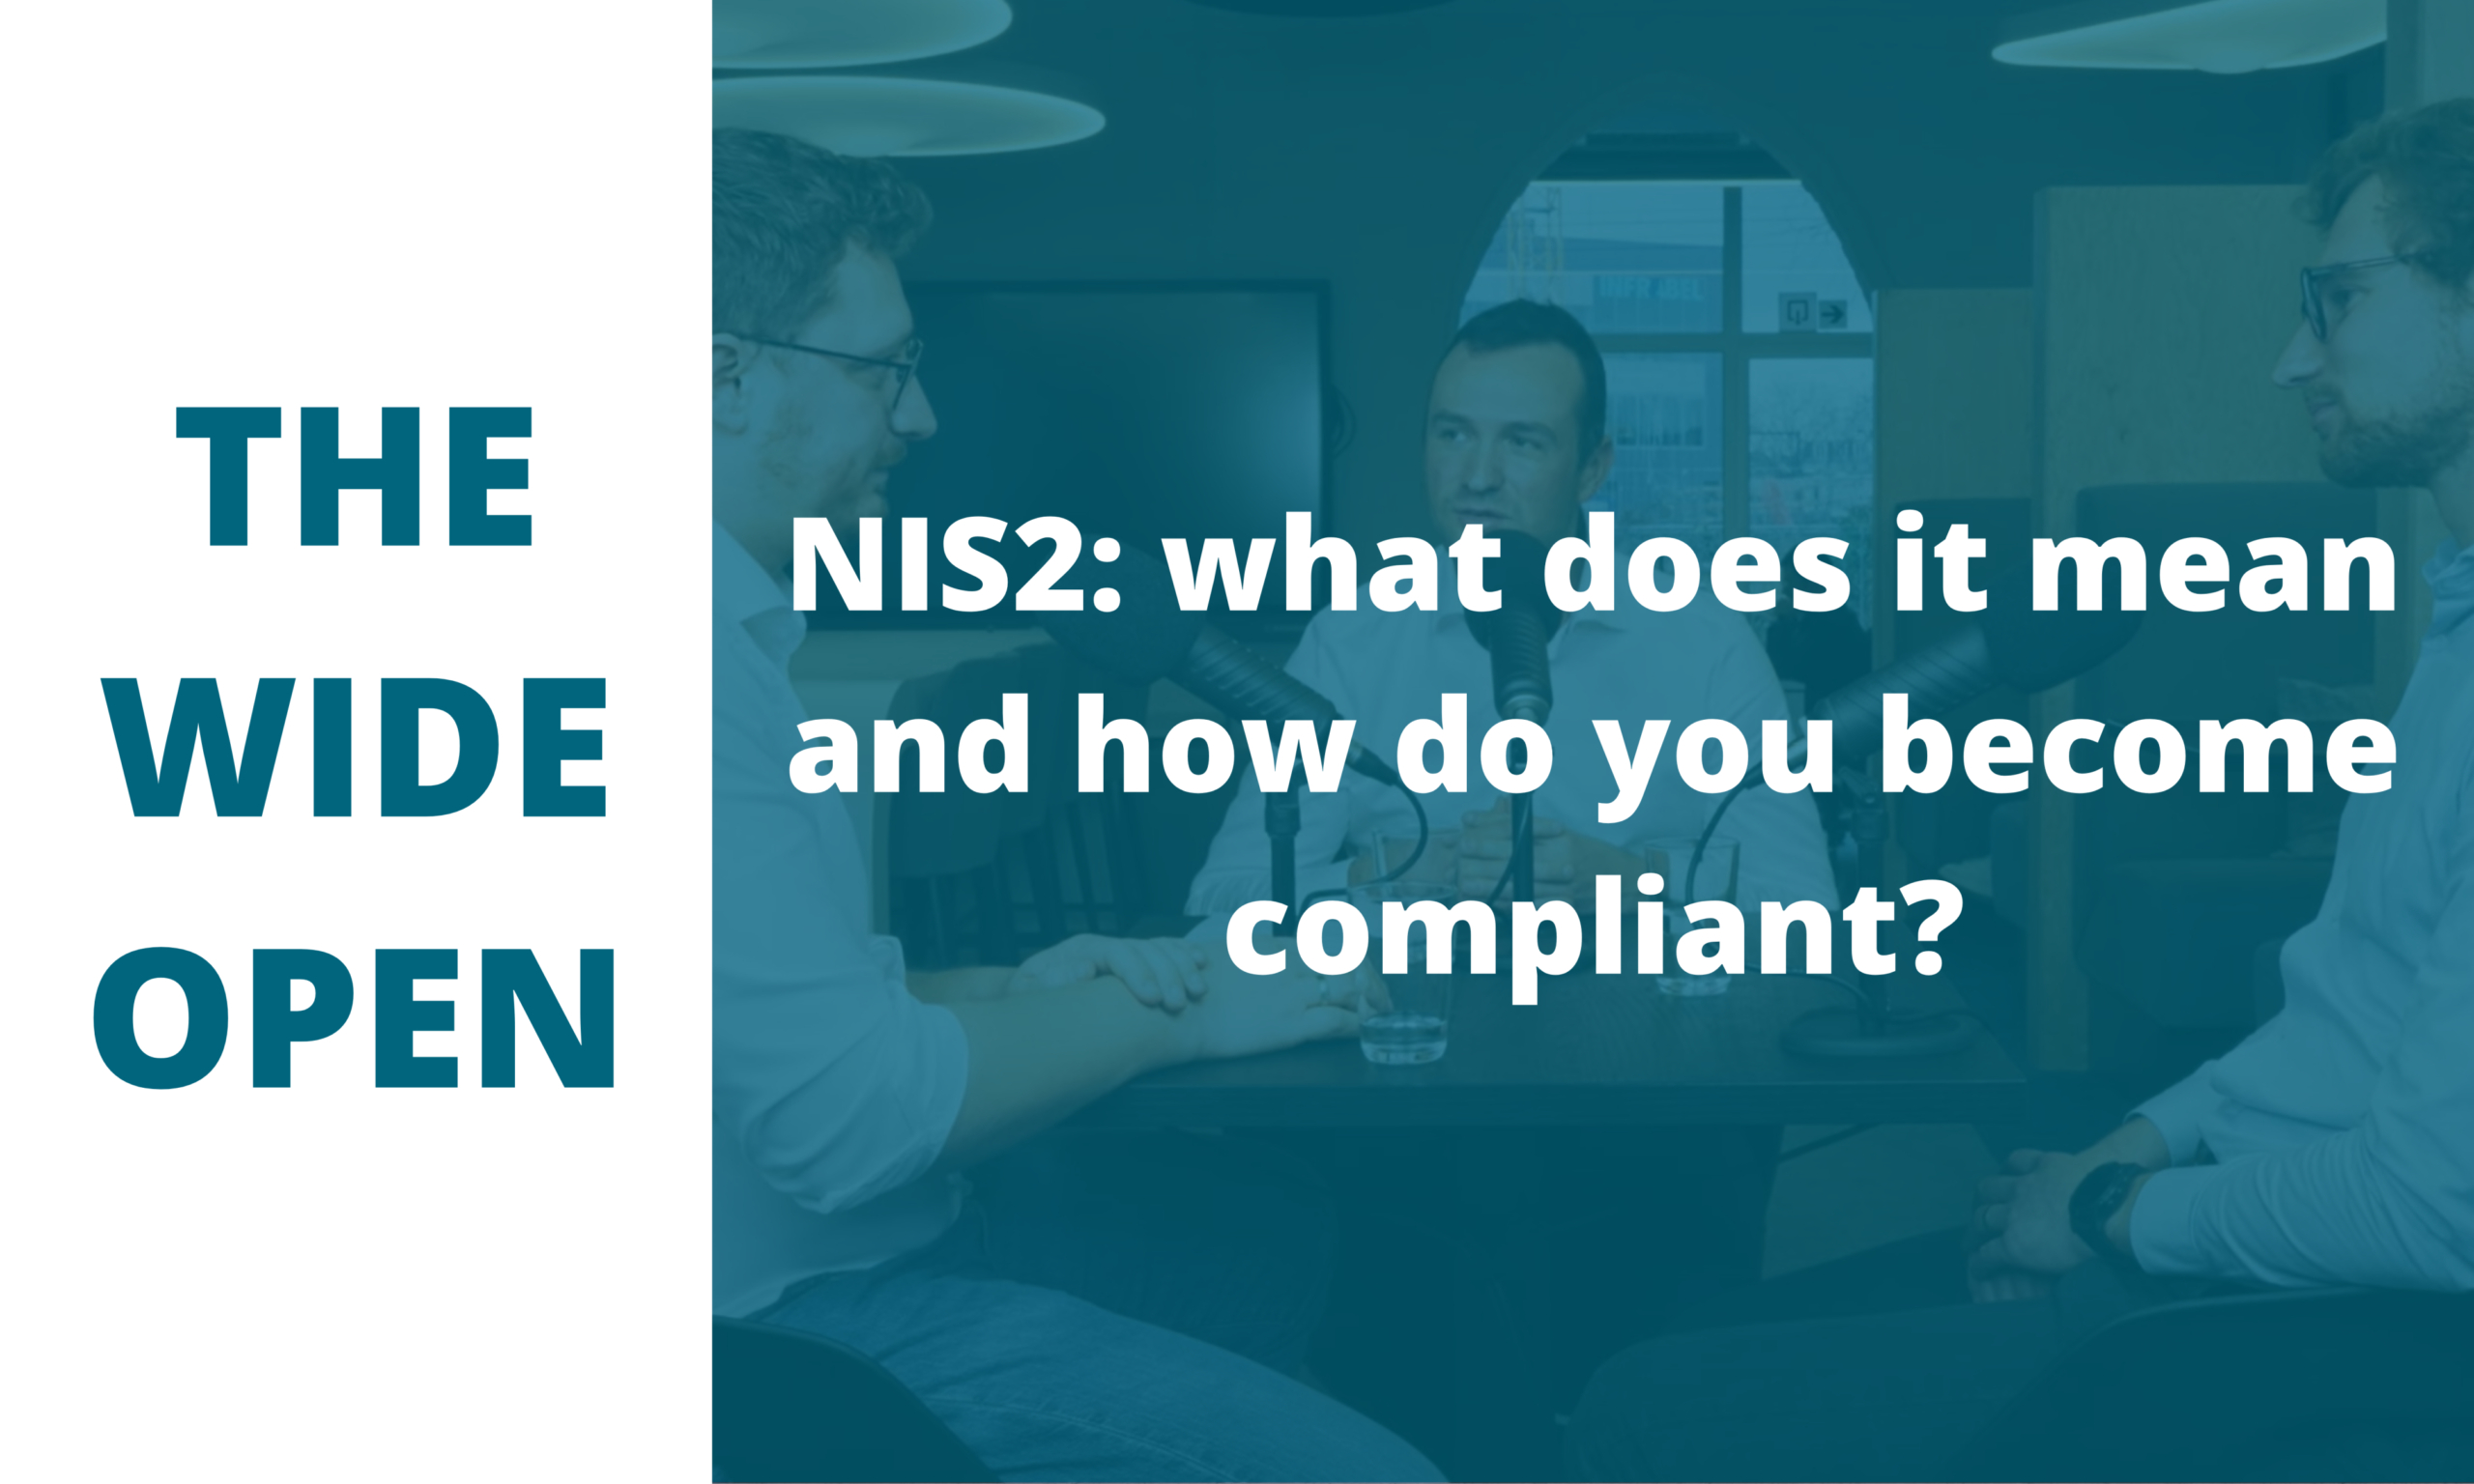 NIS2: what does it mean and how do you become compliant?